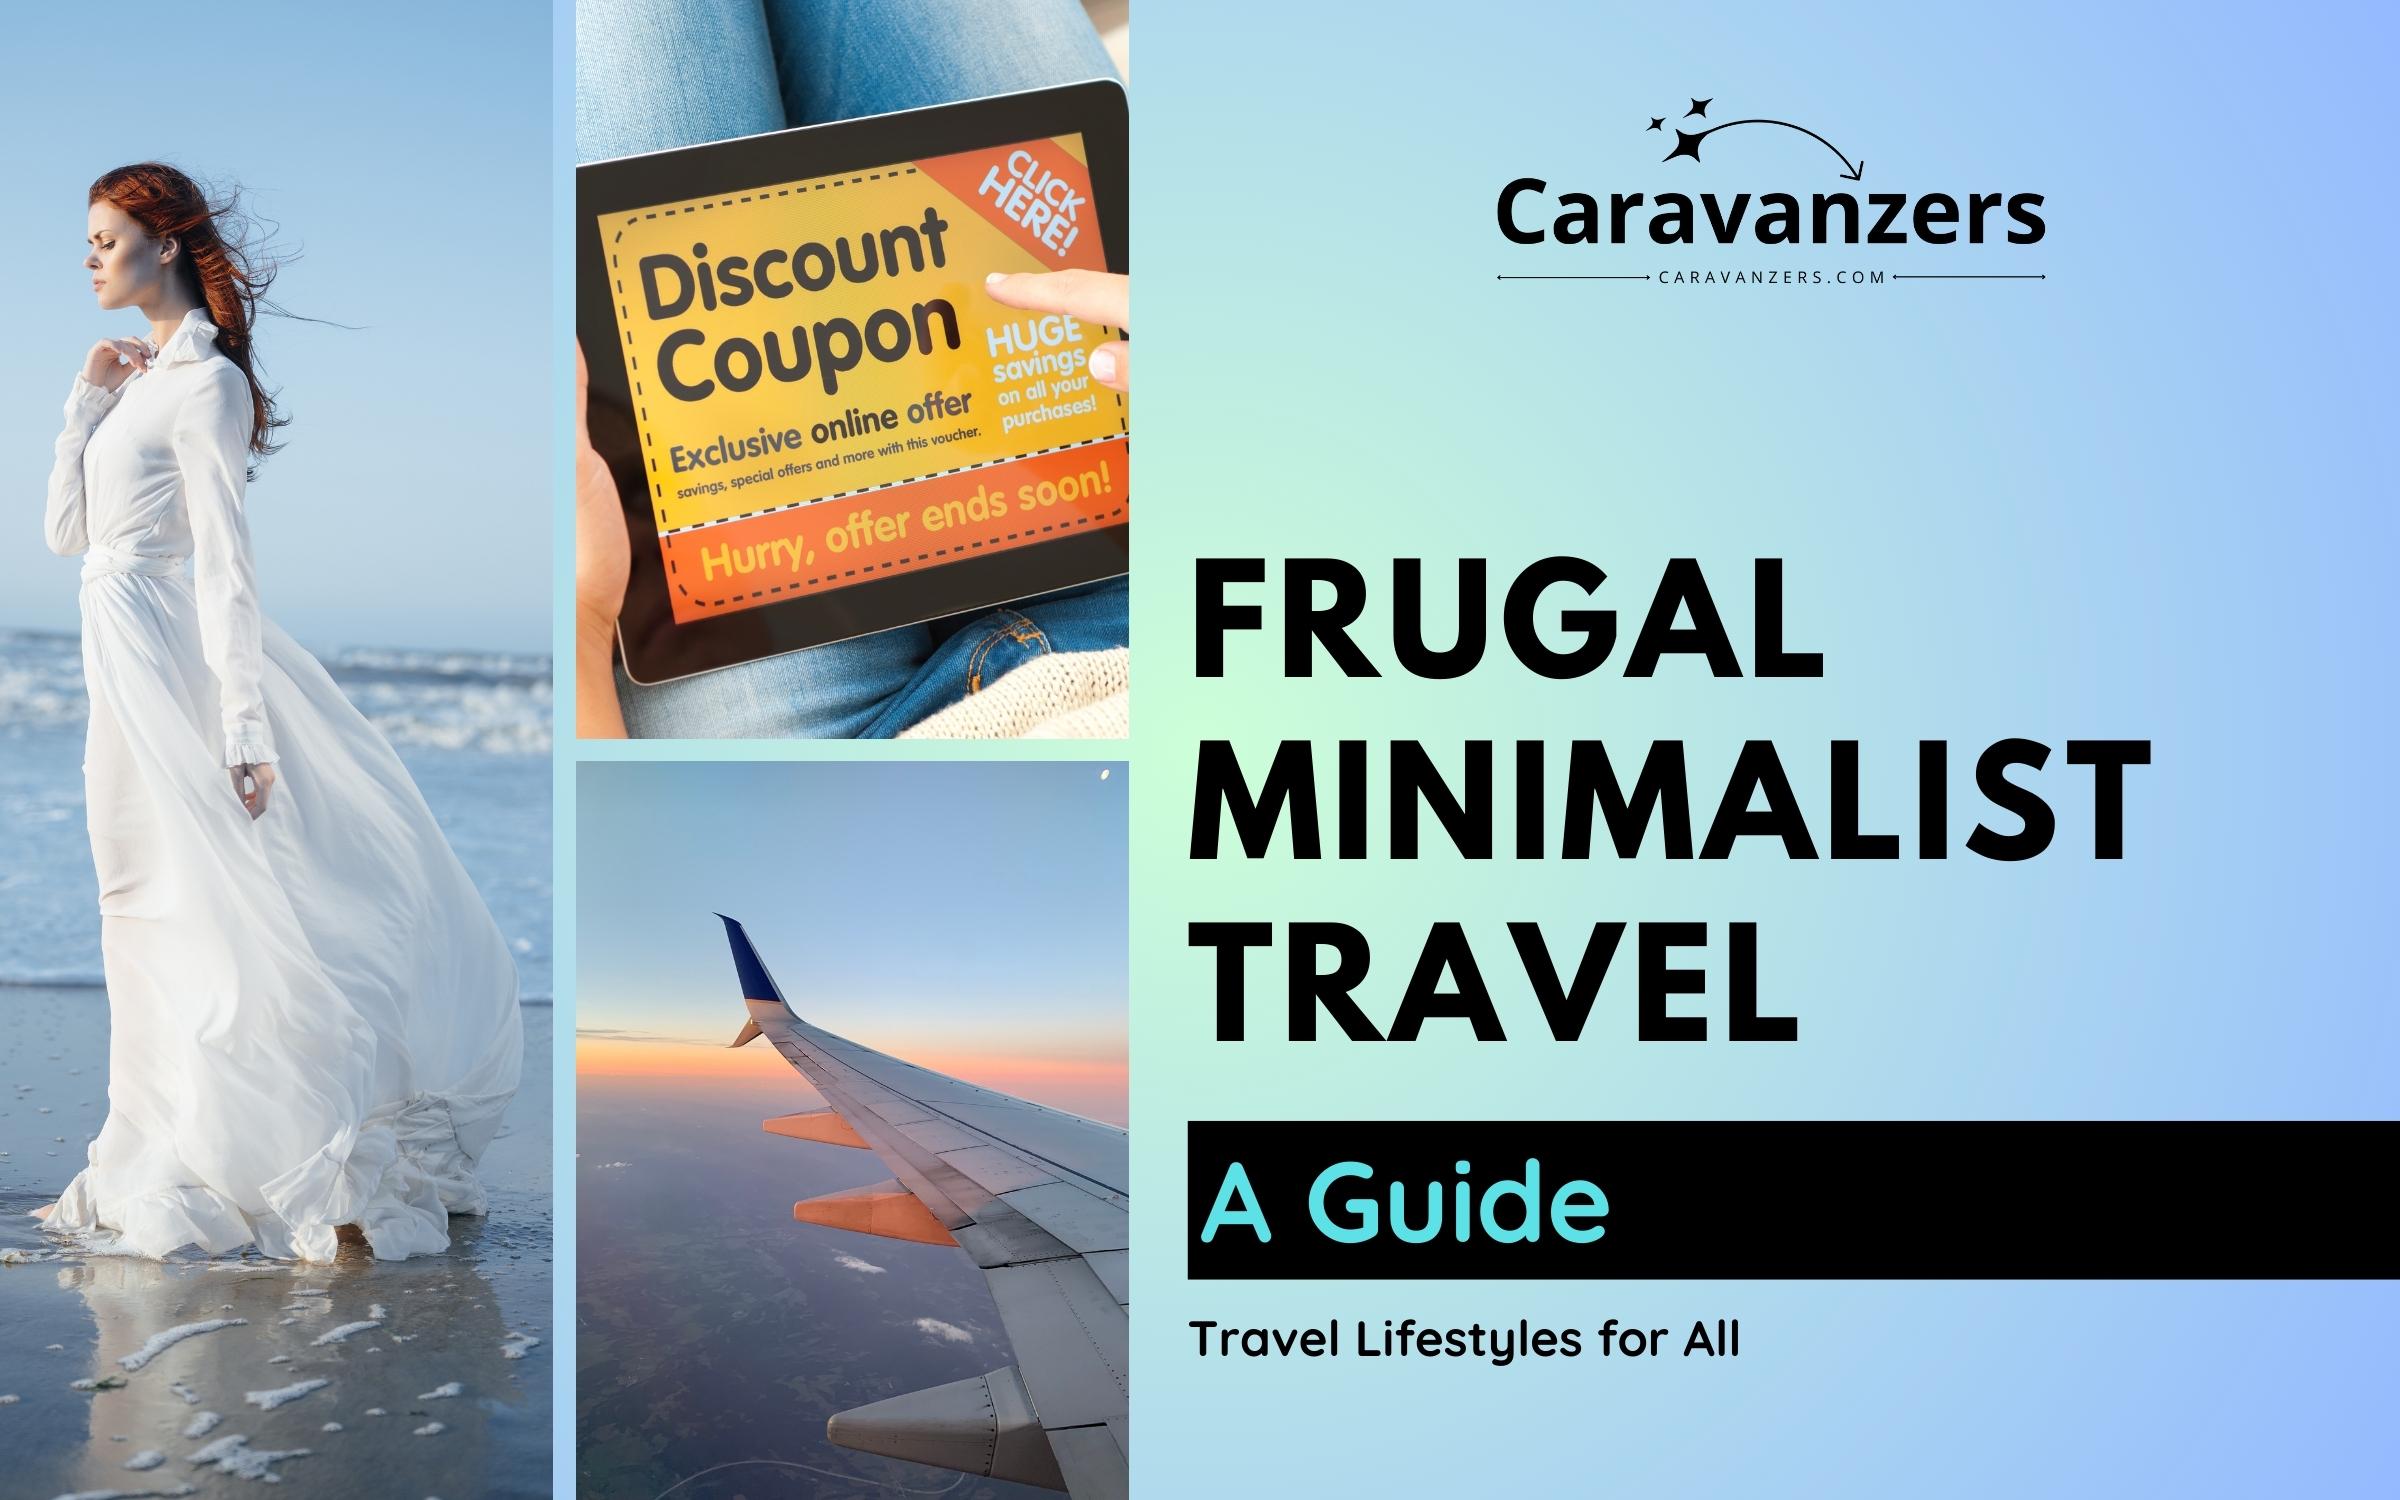 Frugal Minimalist Travel Habits to Adapt for Any Trip - Caravanzers